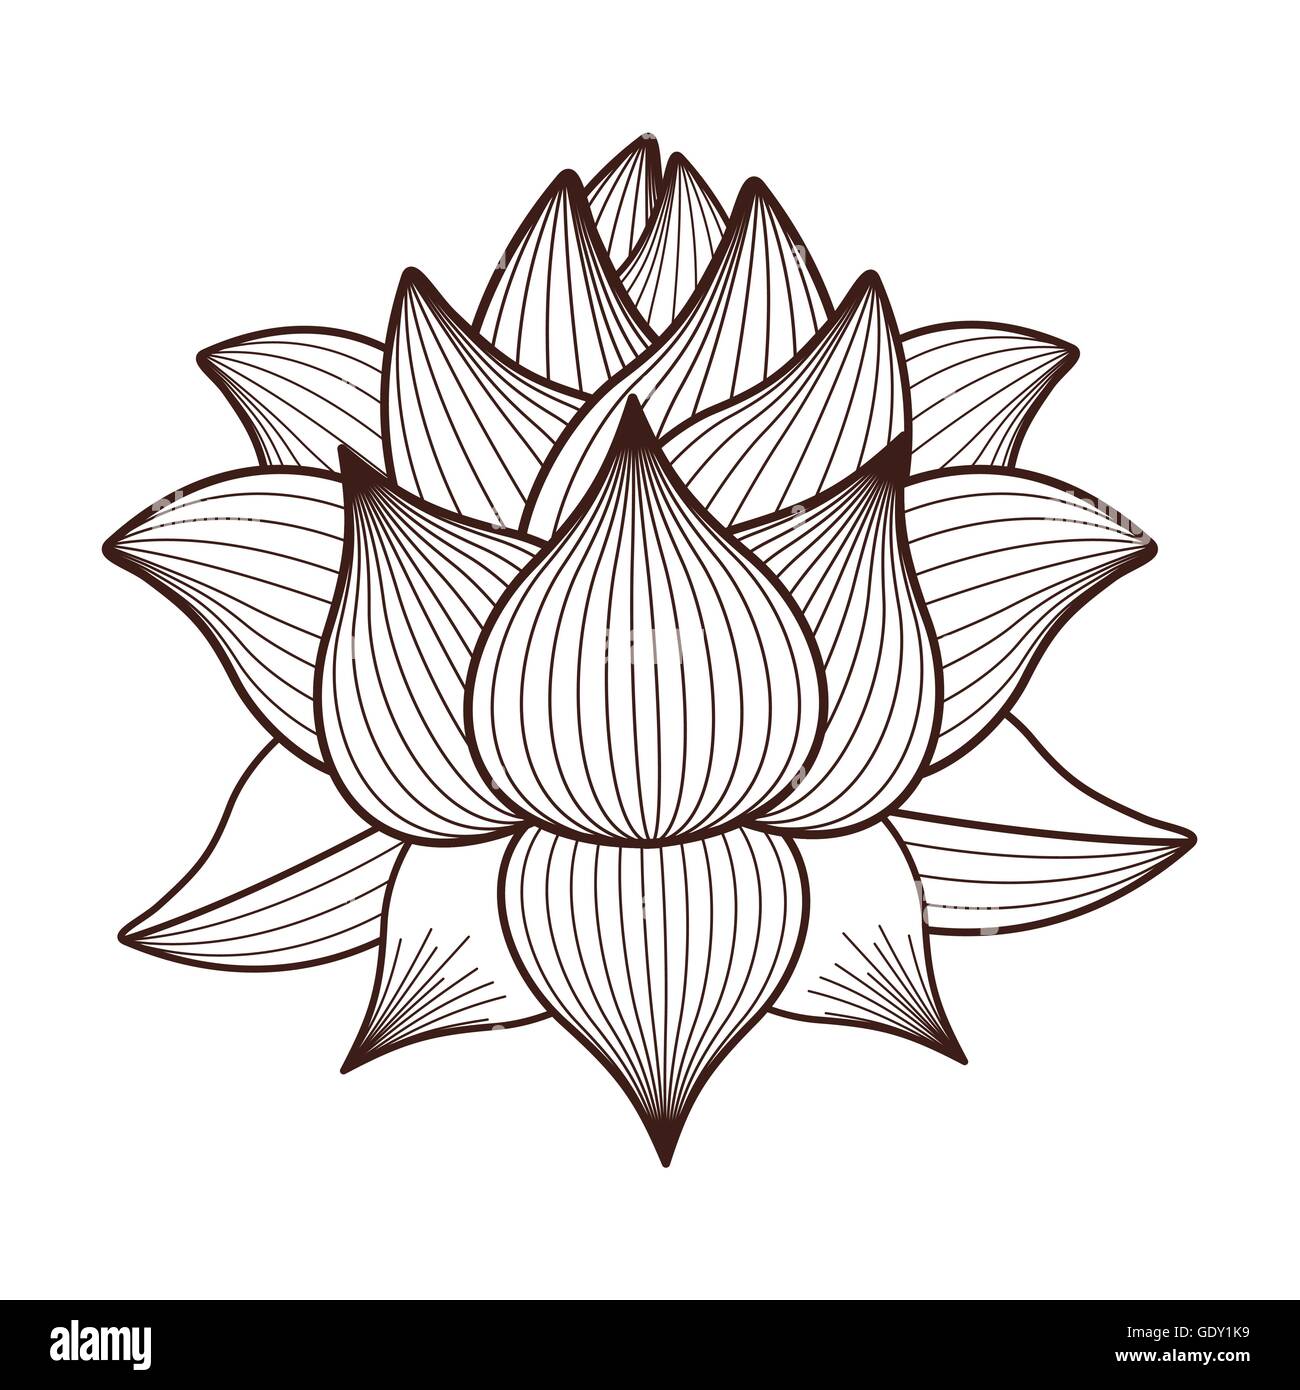 How to Draw Lotus Flower.Step by step easy draw for children, kids,  beginners. - YouTube